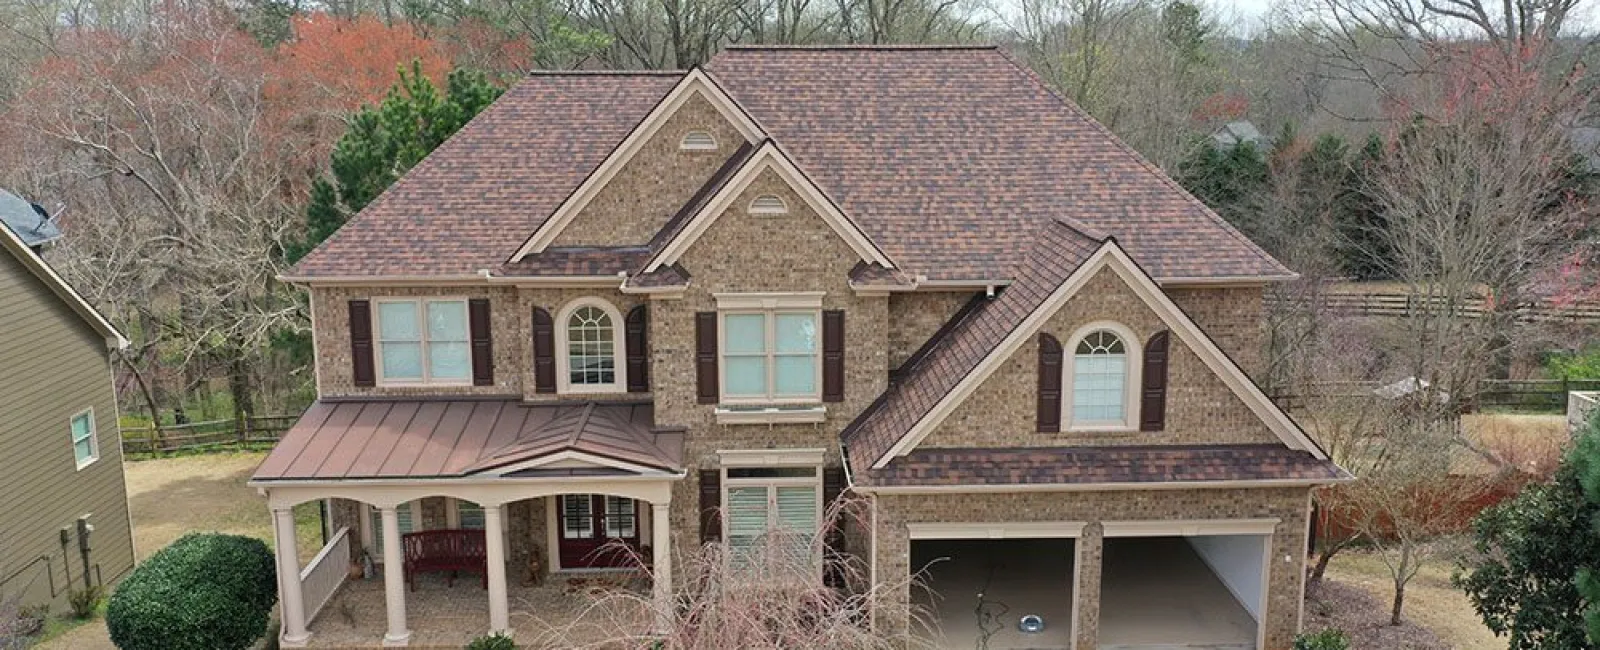 Benefits of Choosing Architectural Shingles Over 3-Tab.